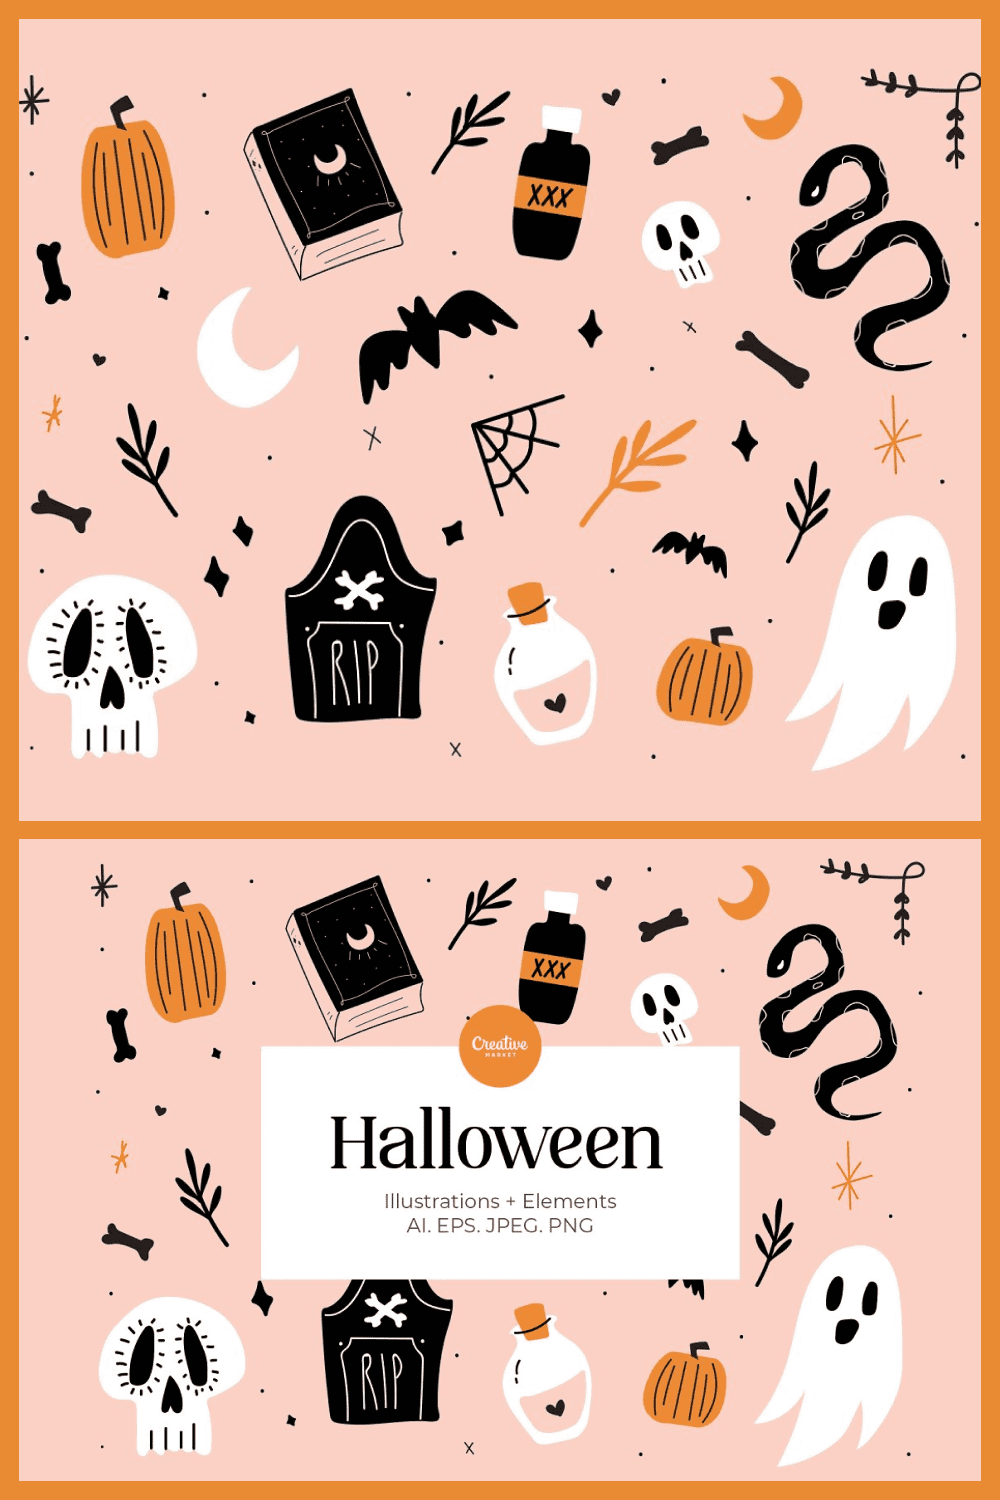 Cute hand-drawn elements for life during the Halloween period.